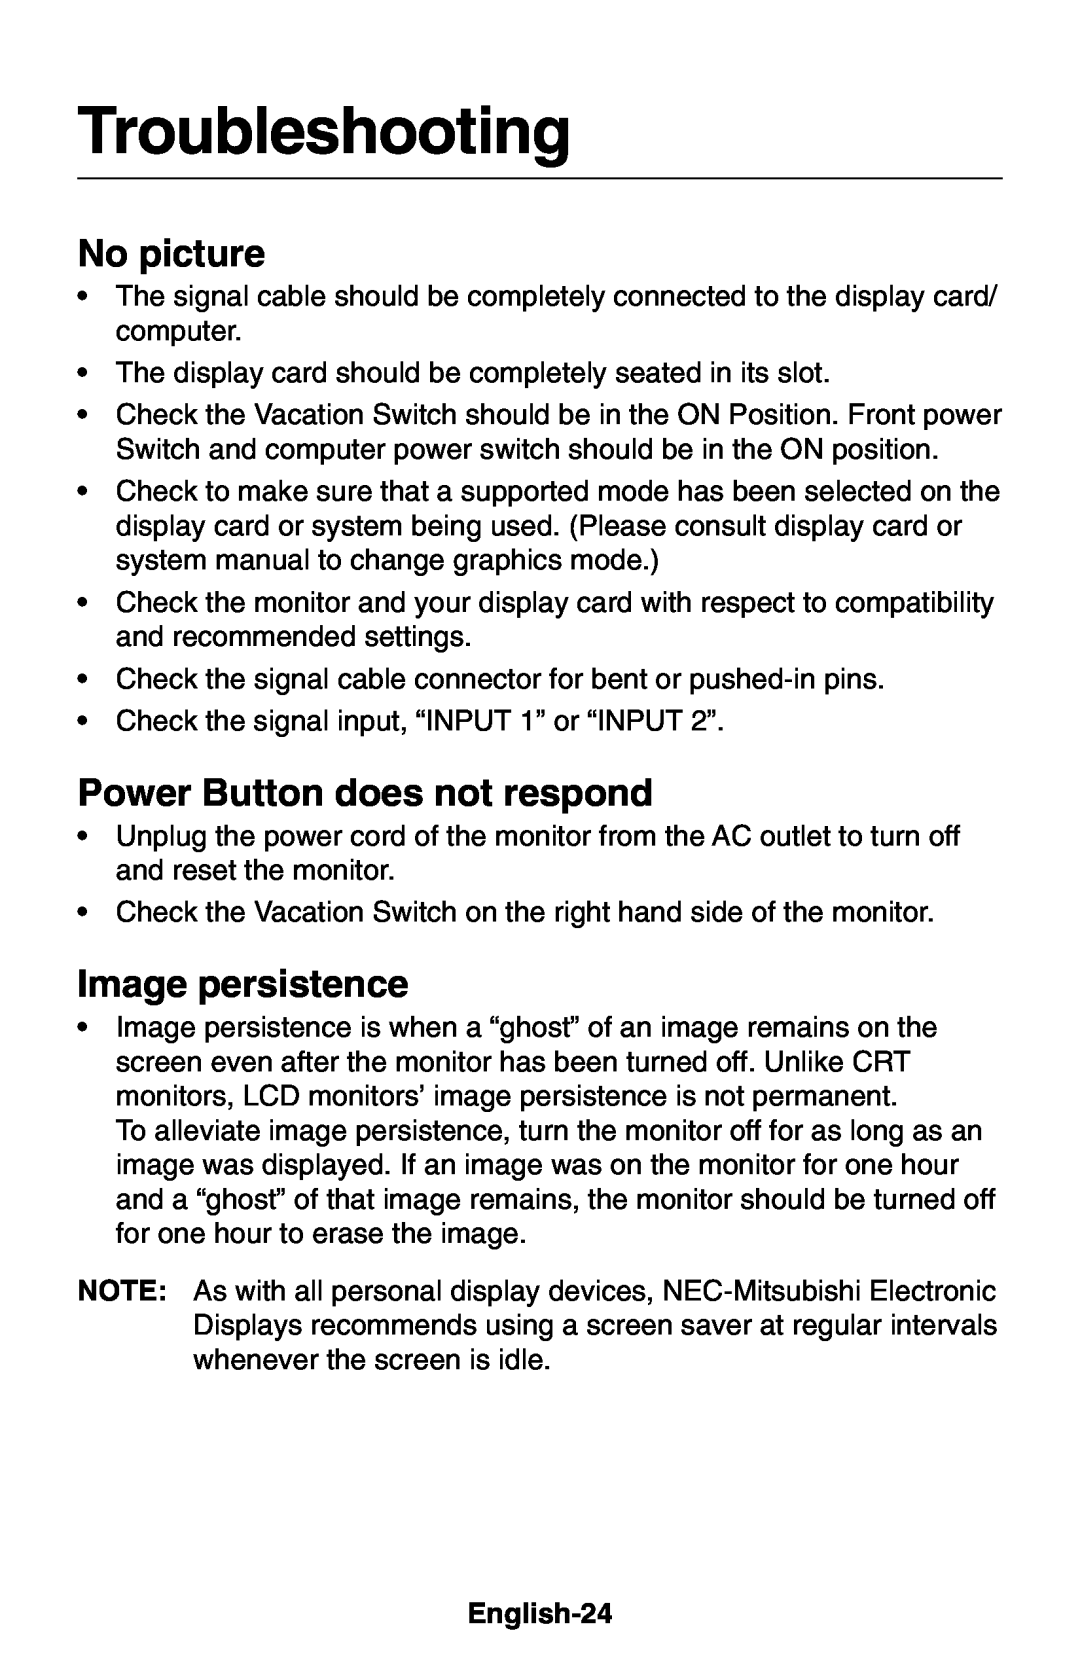 NEC LCD1850E user manual Troubleshooting, No picture, Power Button does not respond, Image persistence 